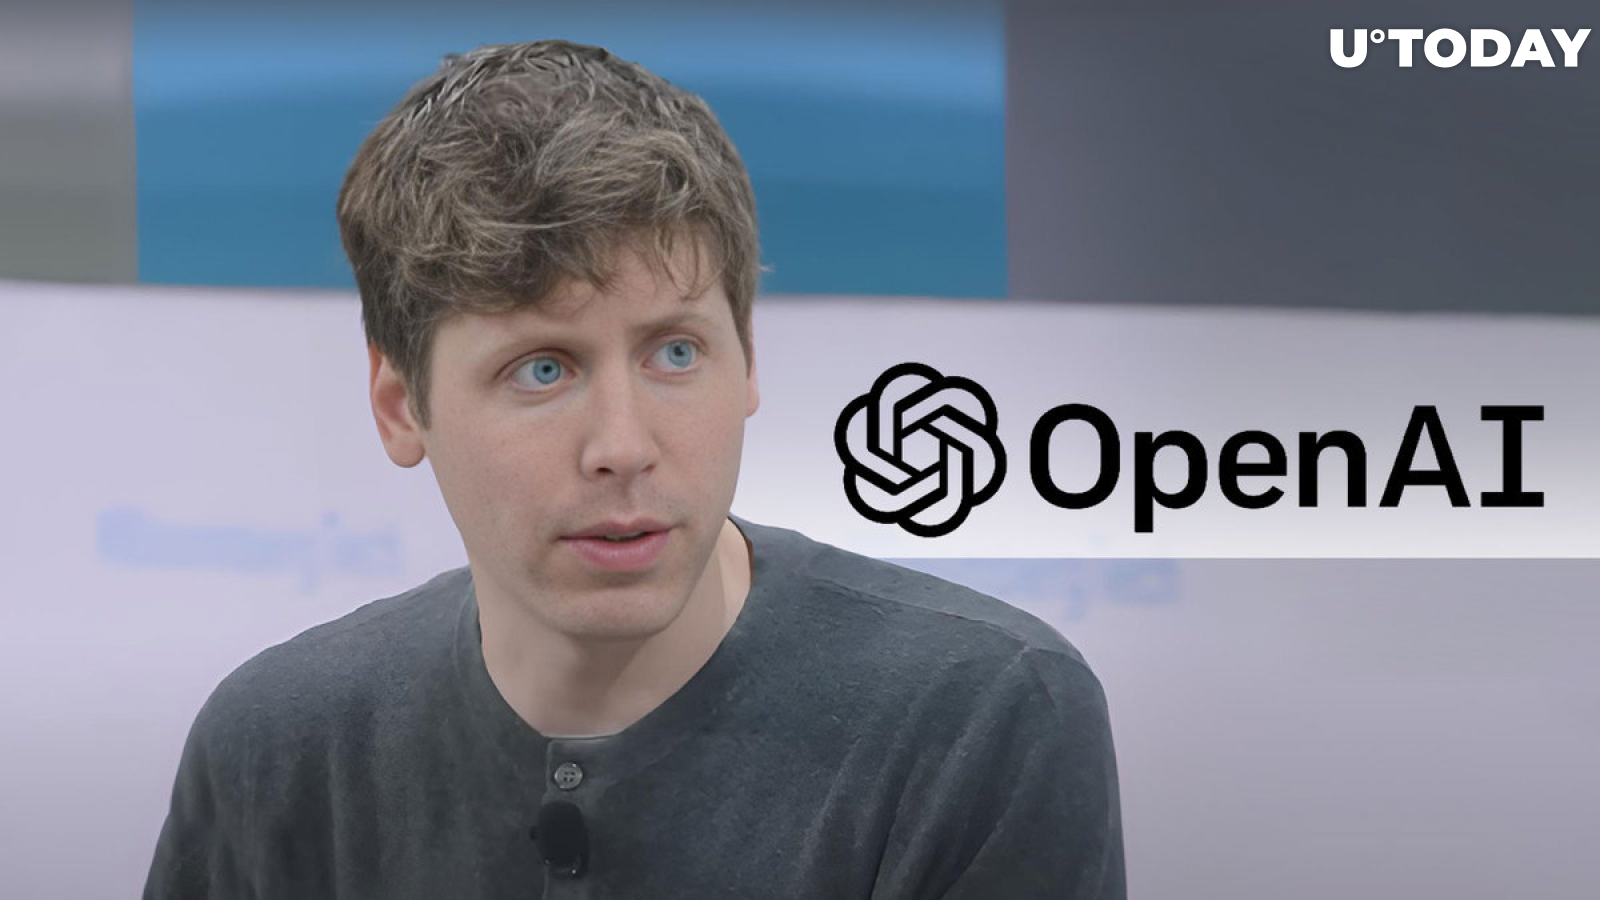 AI Cryptocurrencies Bloom as OpenAI Welcomes Sam Altman Back as CEO